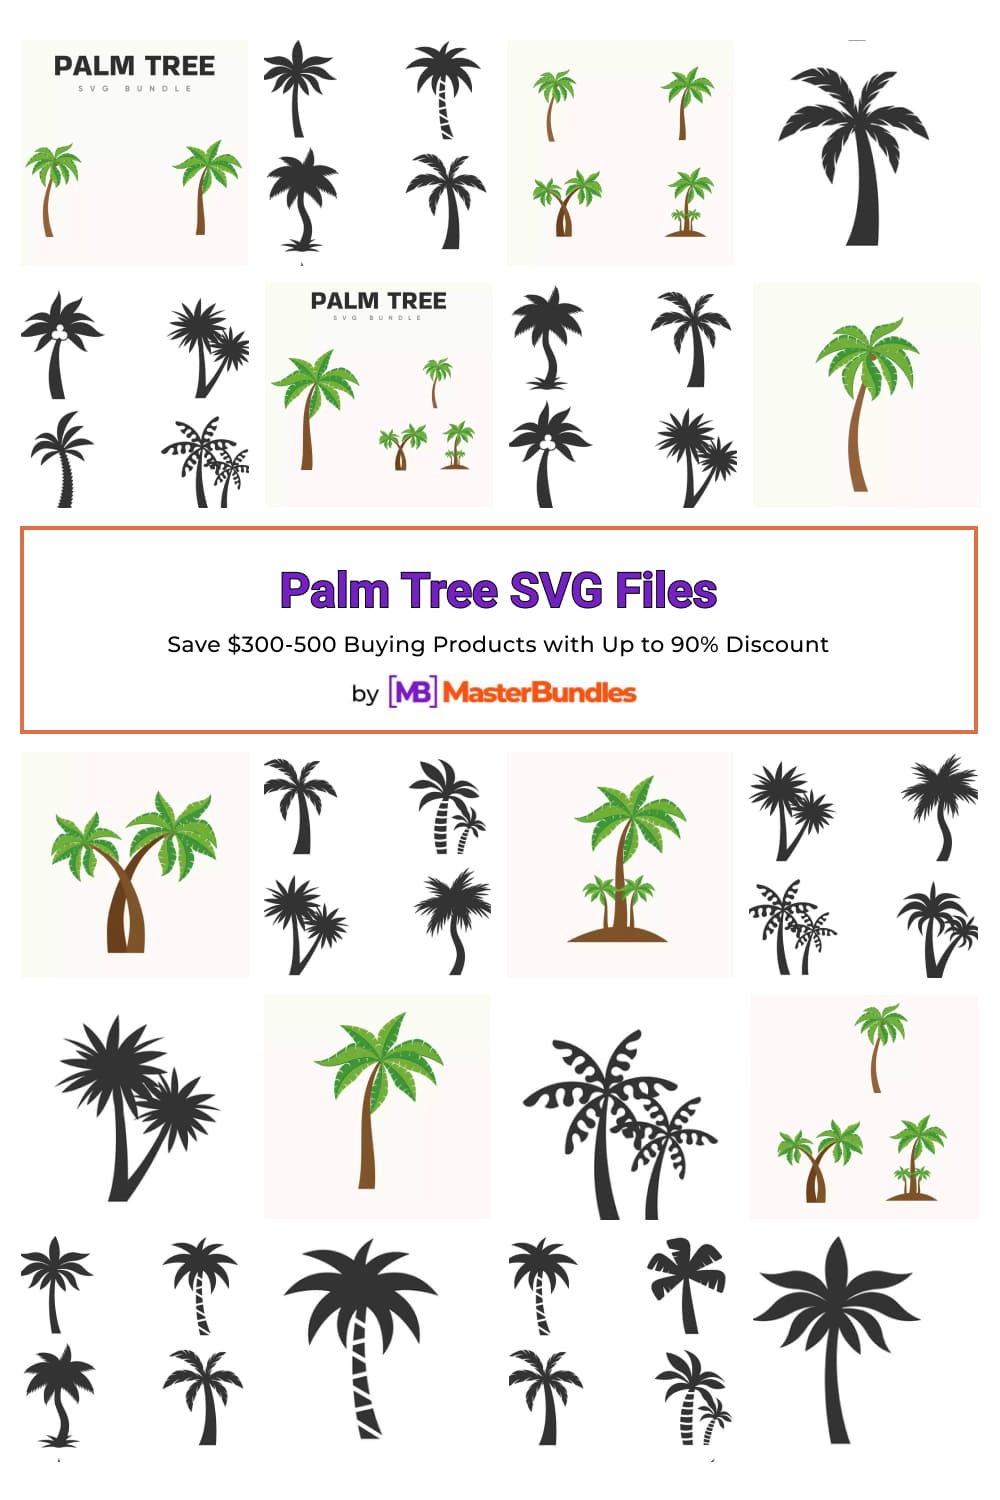 Palm Tree SVG Files for pinterest.